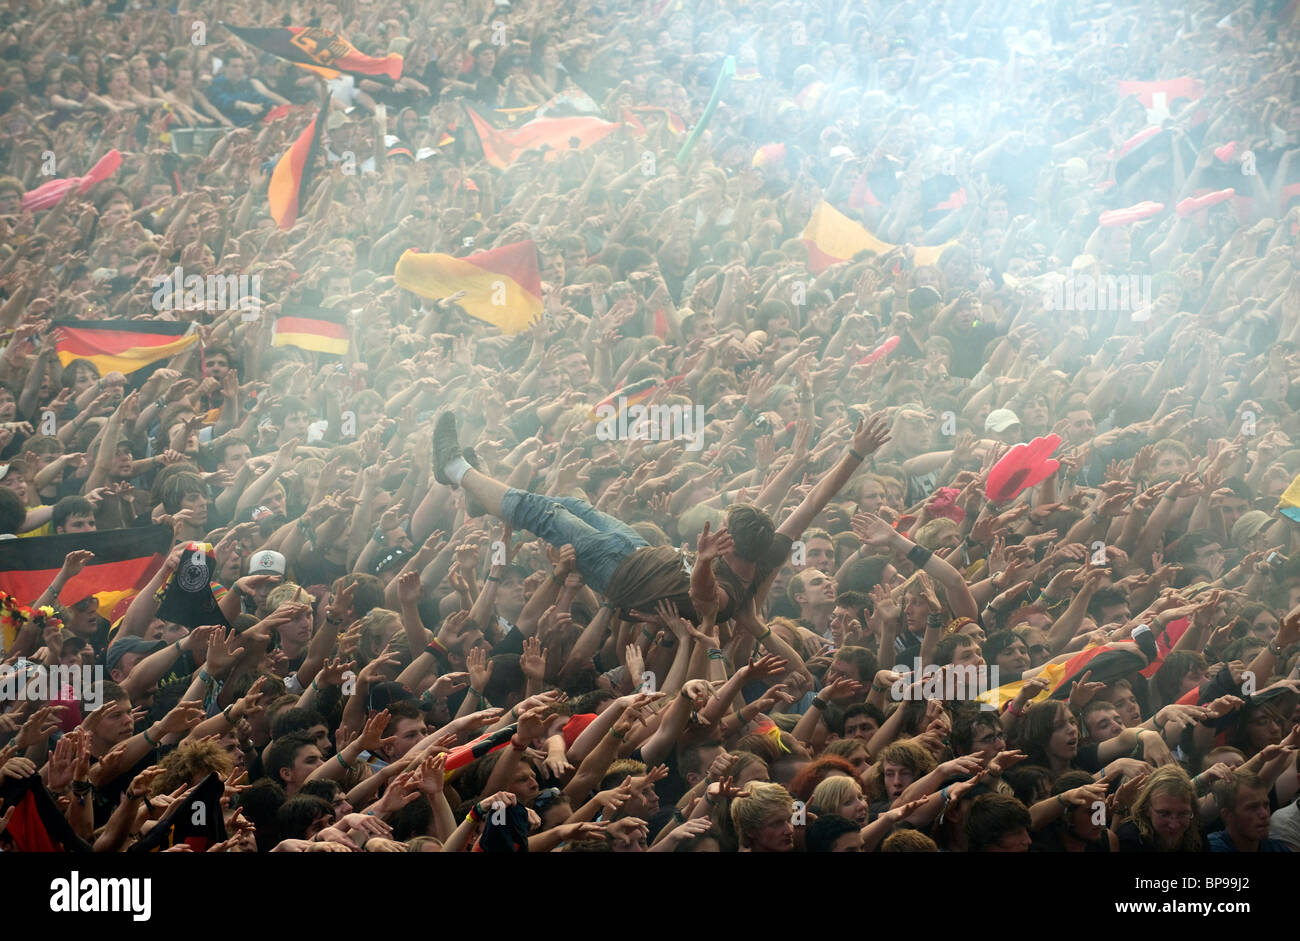 A European Football Championship game between Germany and Poland, Nuremberg, Germany Stock Photo